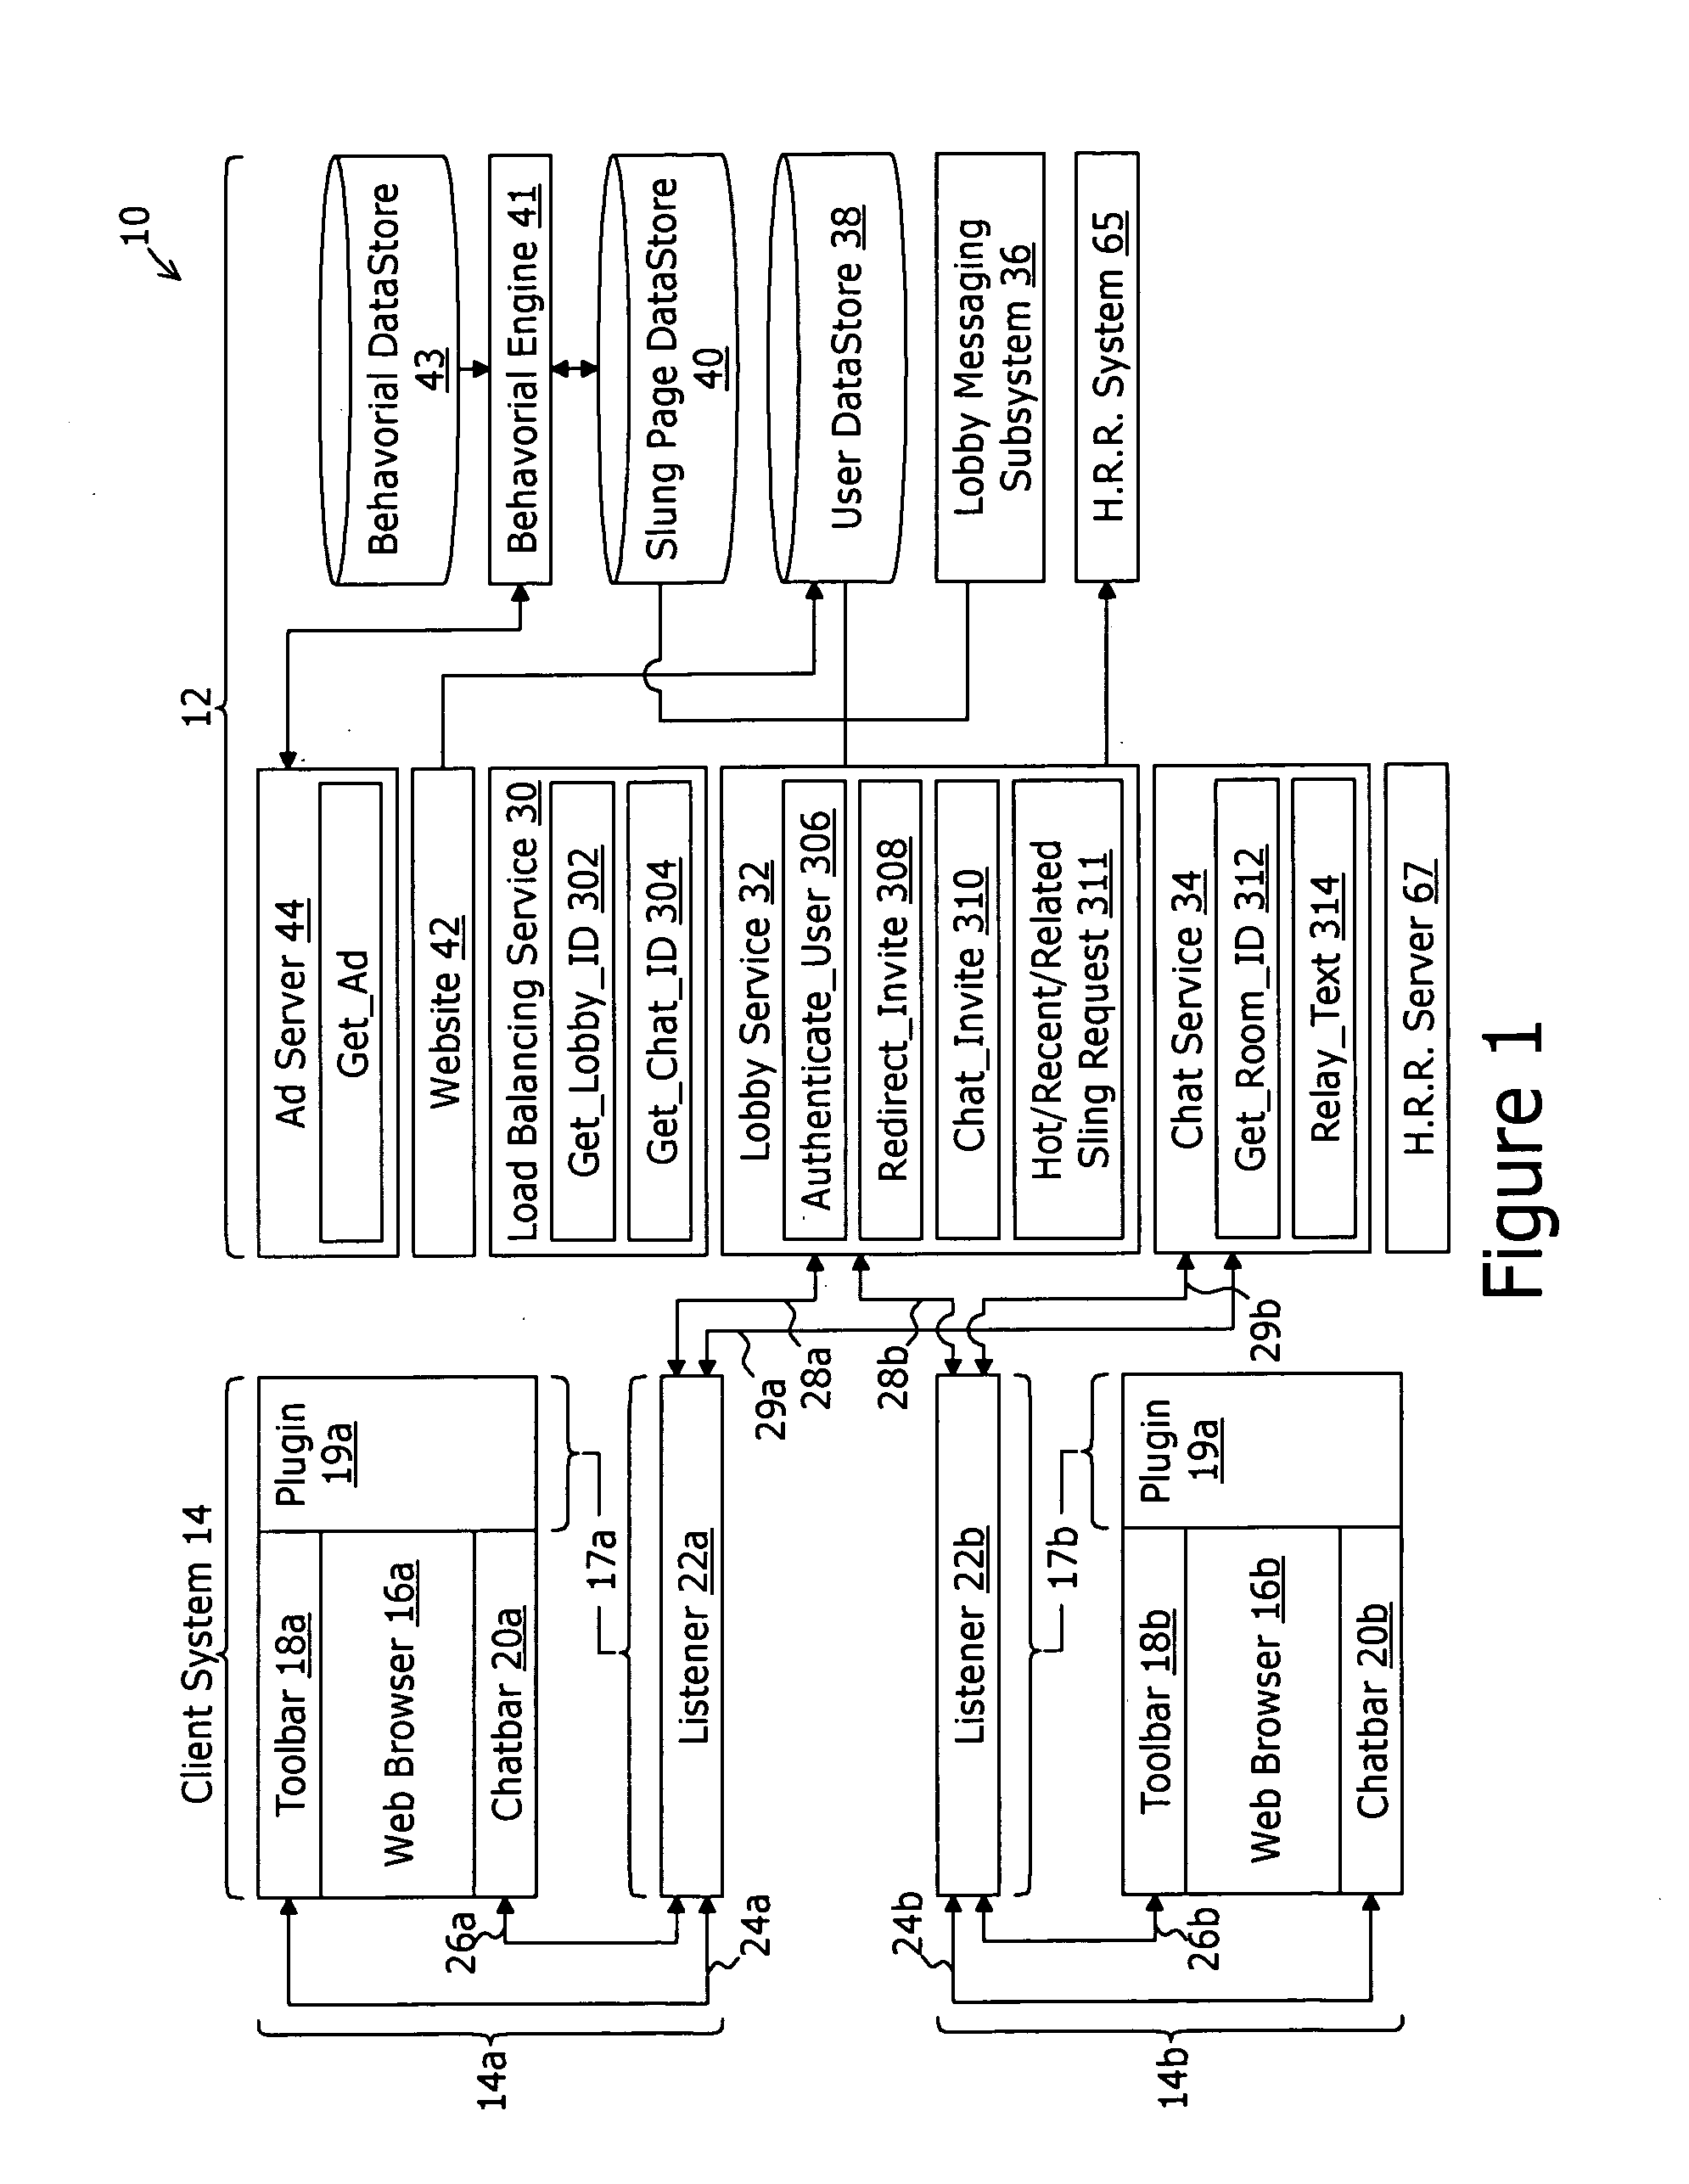 System and method to facilitate social browsing